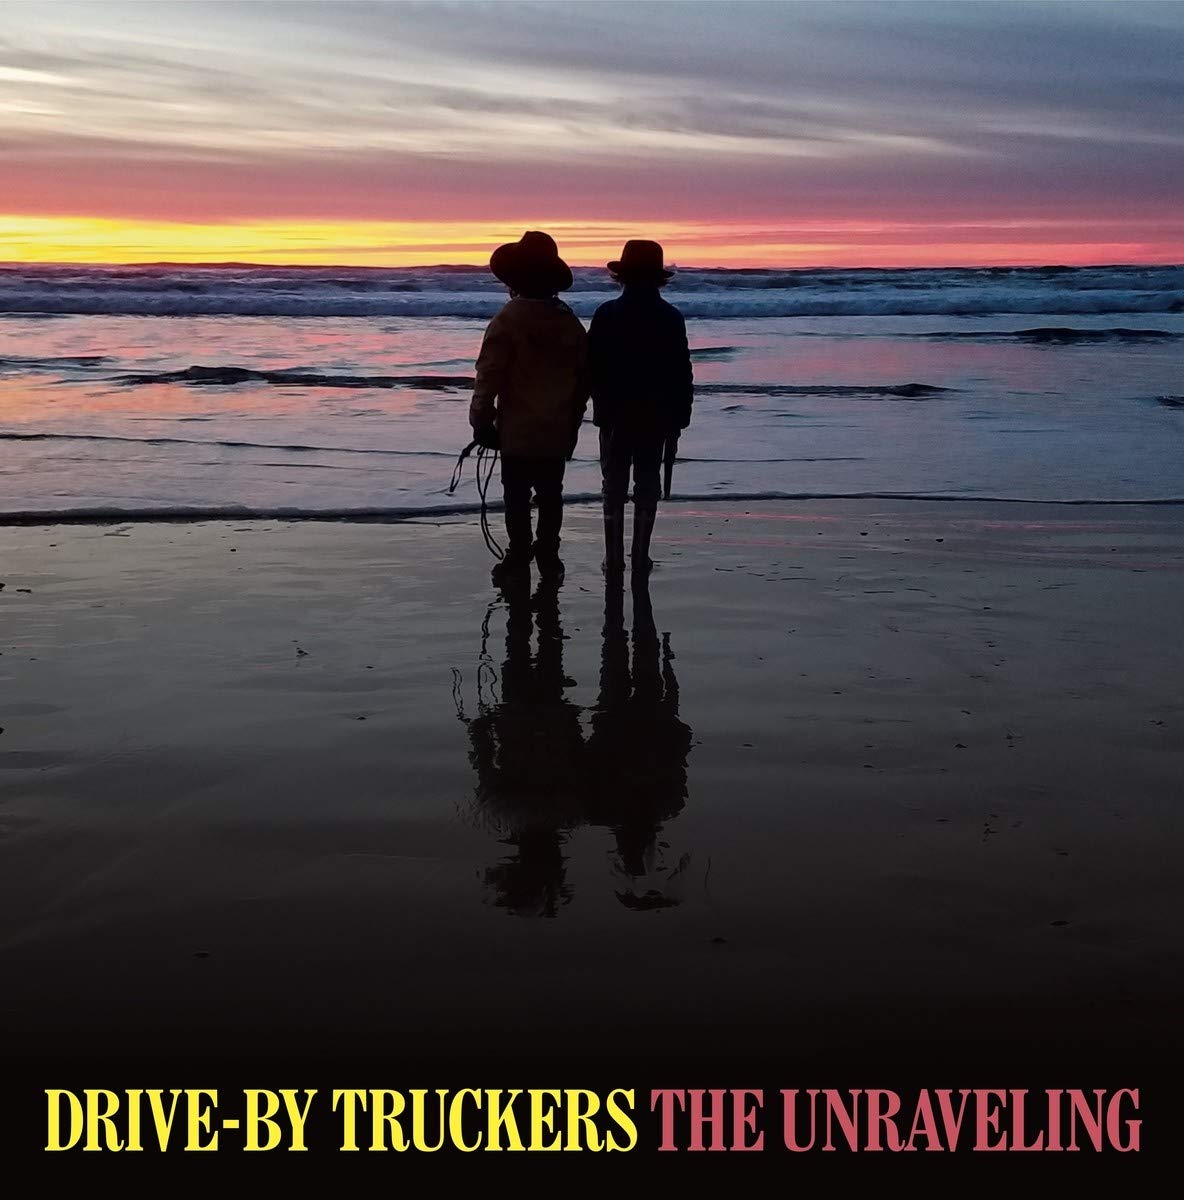 Drive-By Truckers: The Unraveling